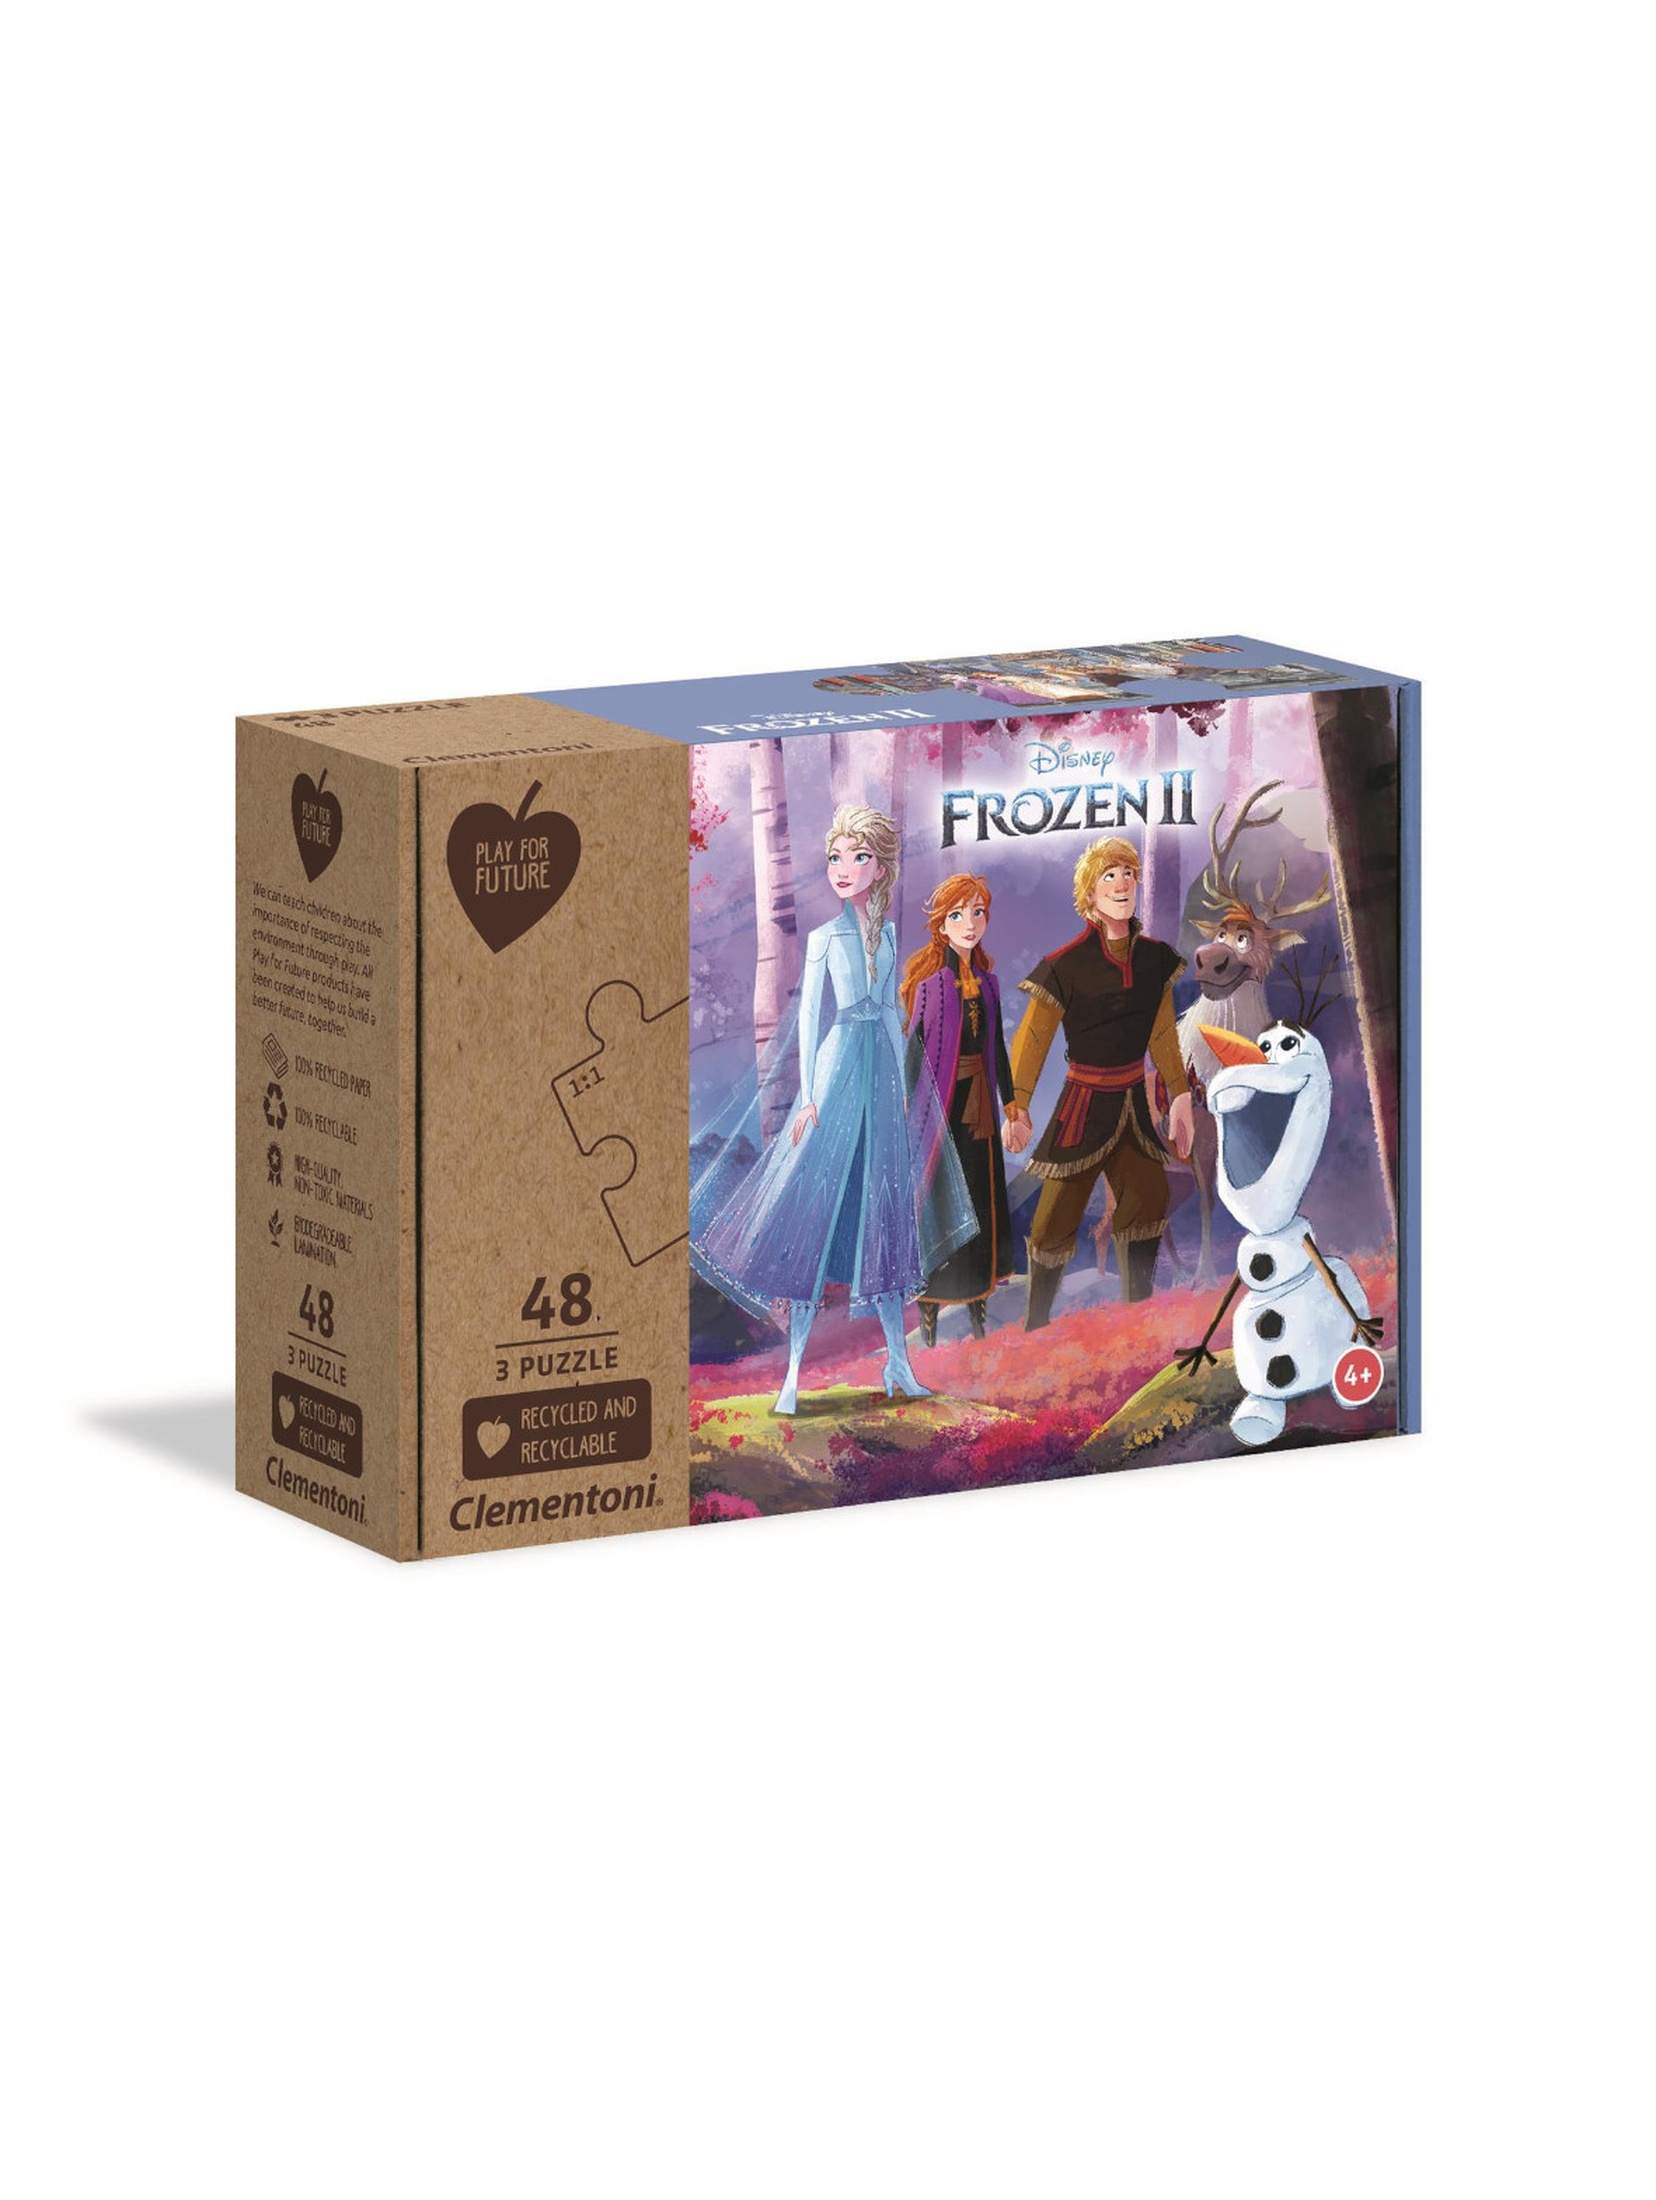 Puzzle 3 x 48 elelentów Play for future - Frozen 2